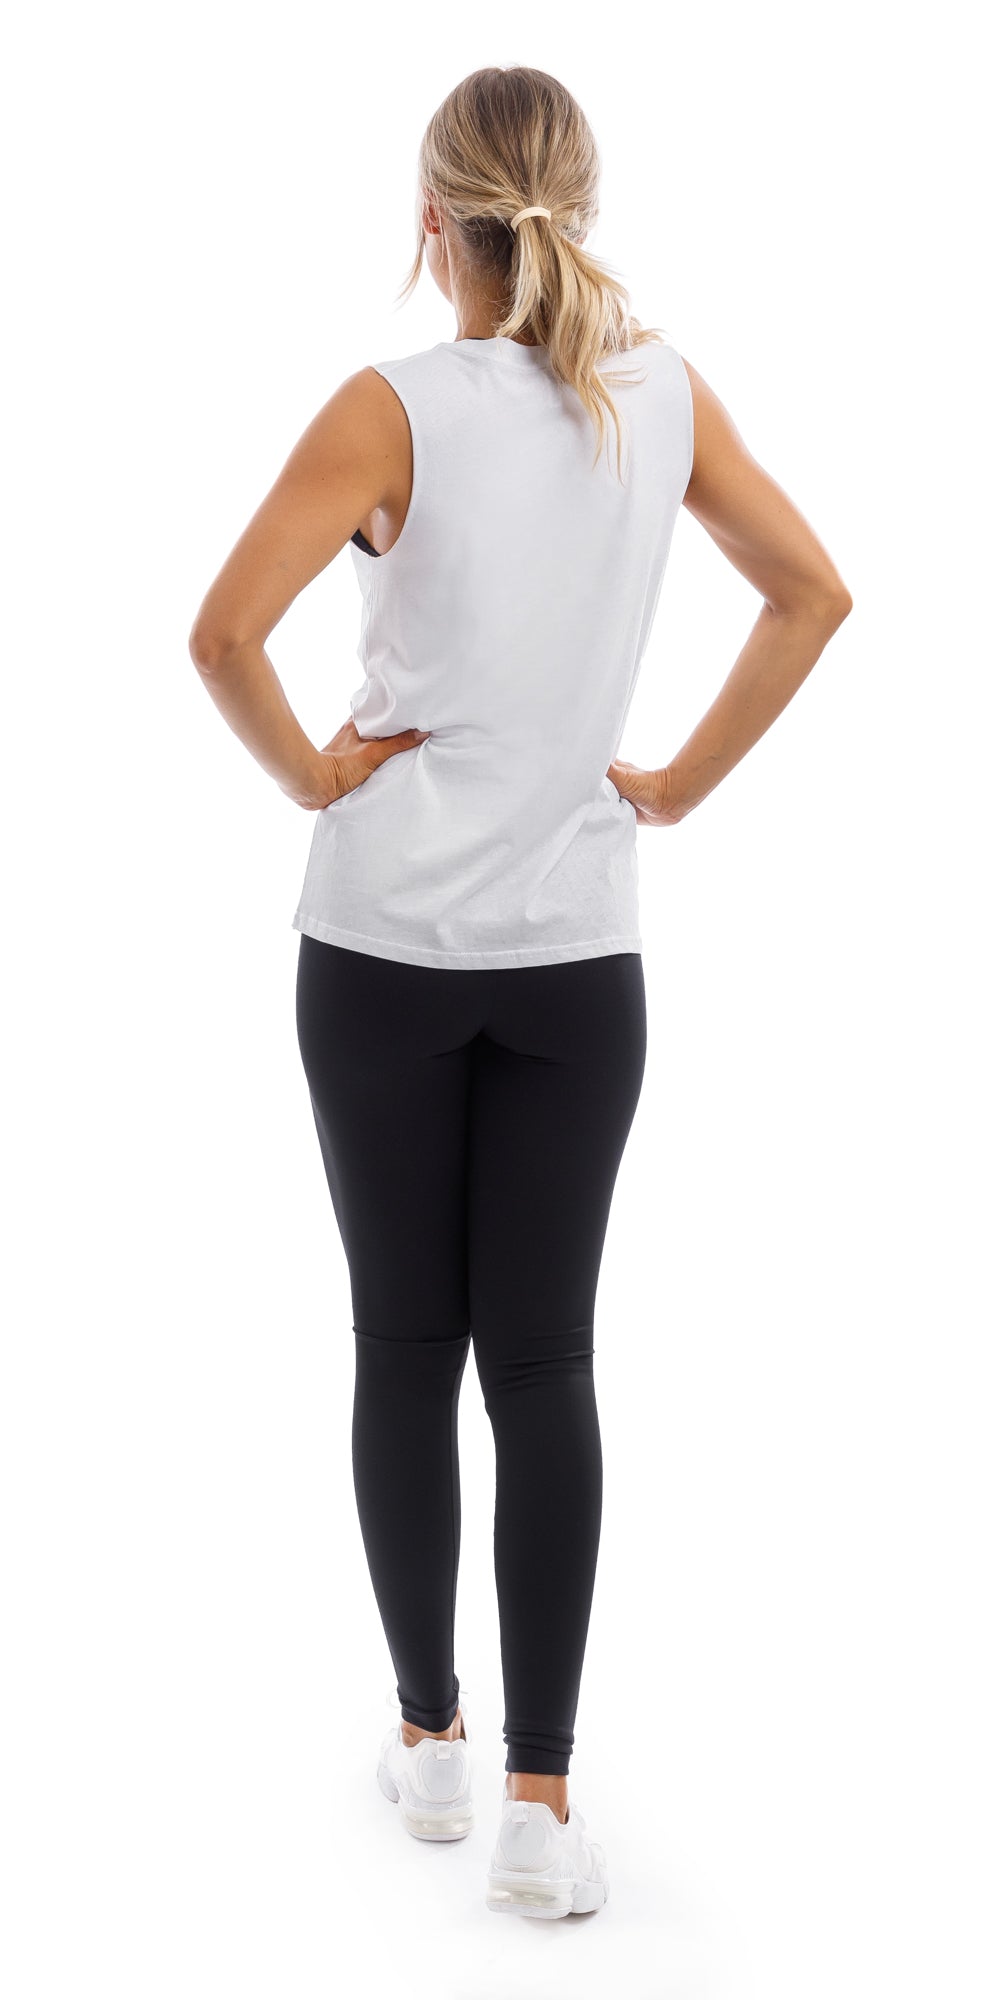 Full body rear view of lady in White CL Active Tank and black leggings walking and putting both hands on waist